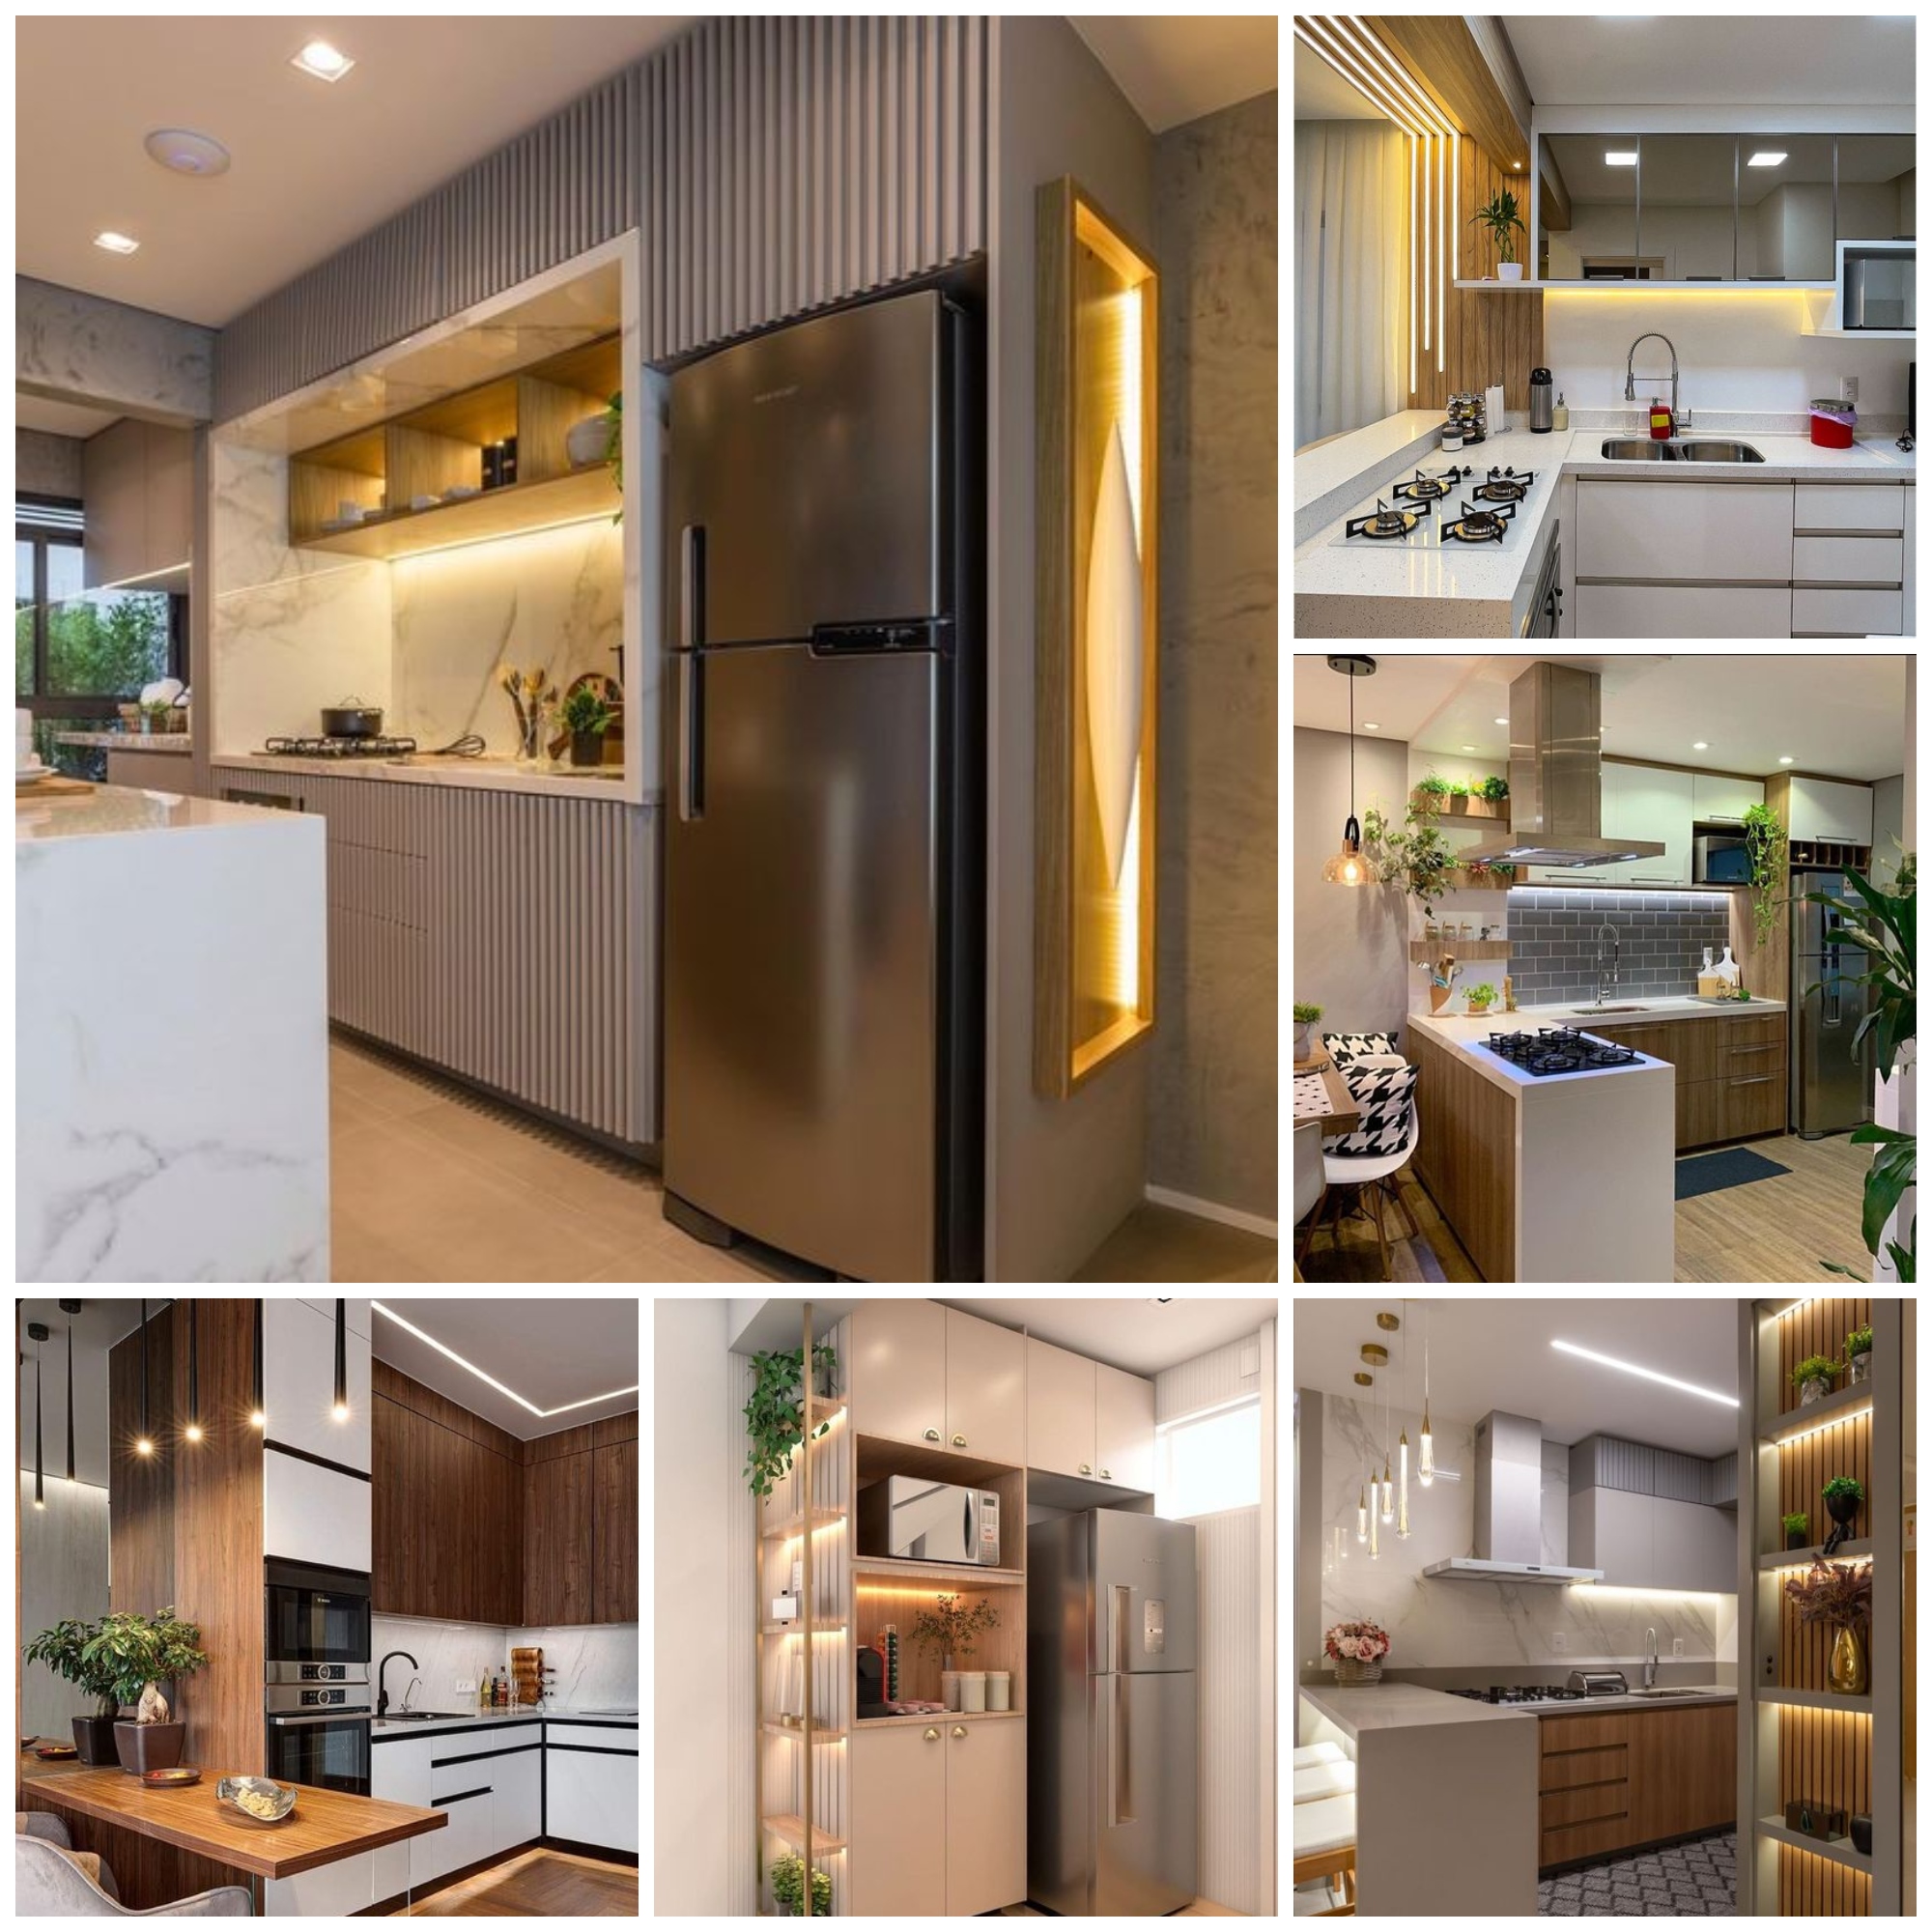 Experience Luxury Living with Modern Kitchen Designs